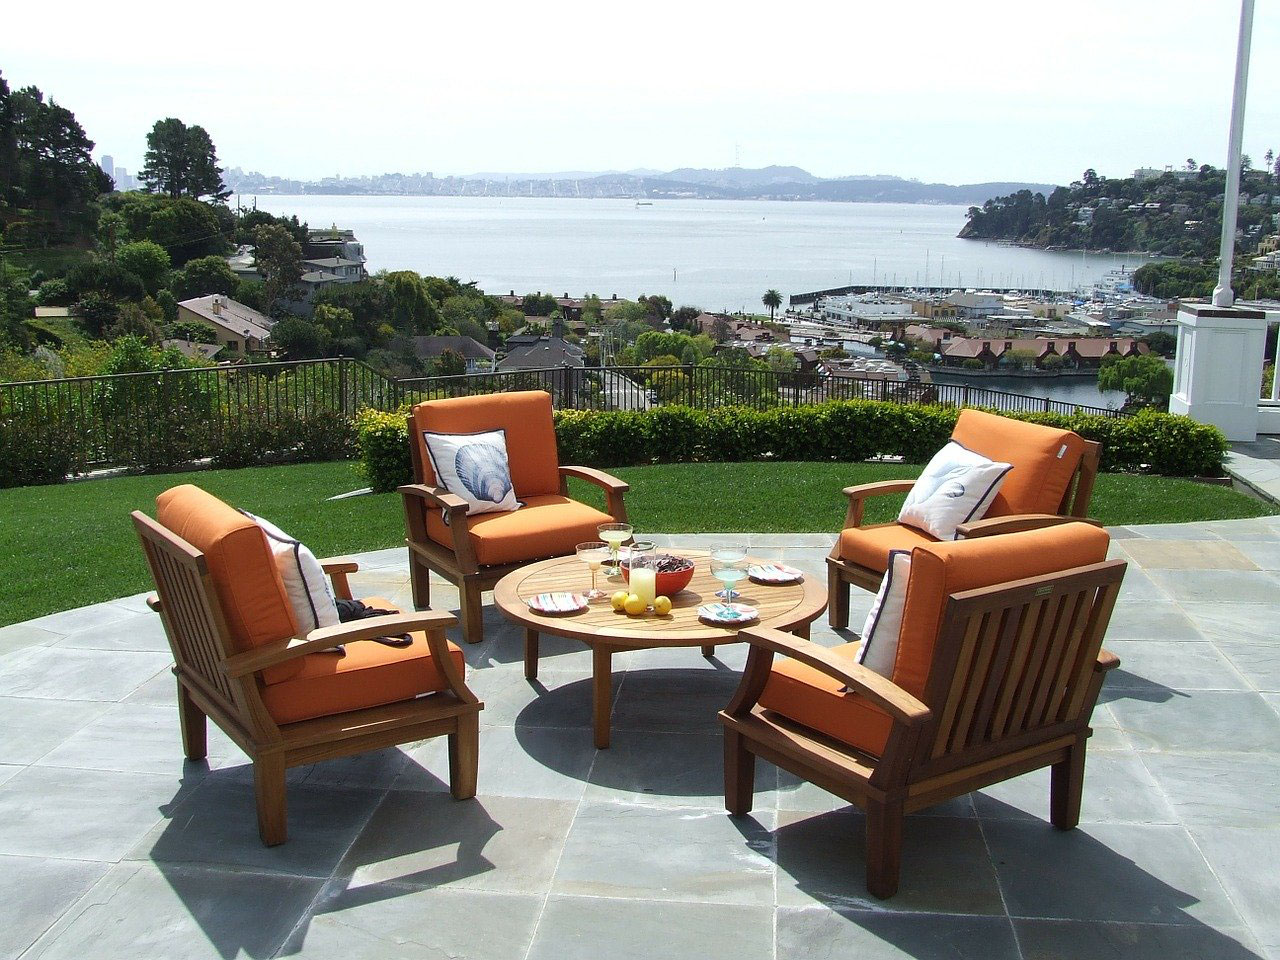 Make Your Outdoor Space Beautiful With The Chic Teak Furniture